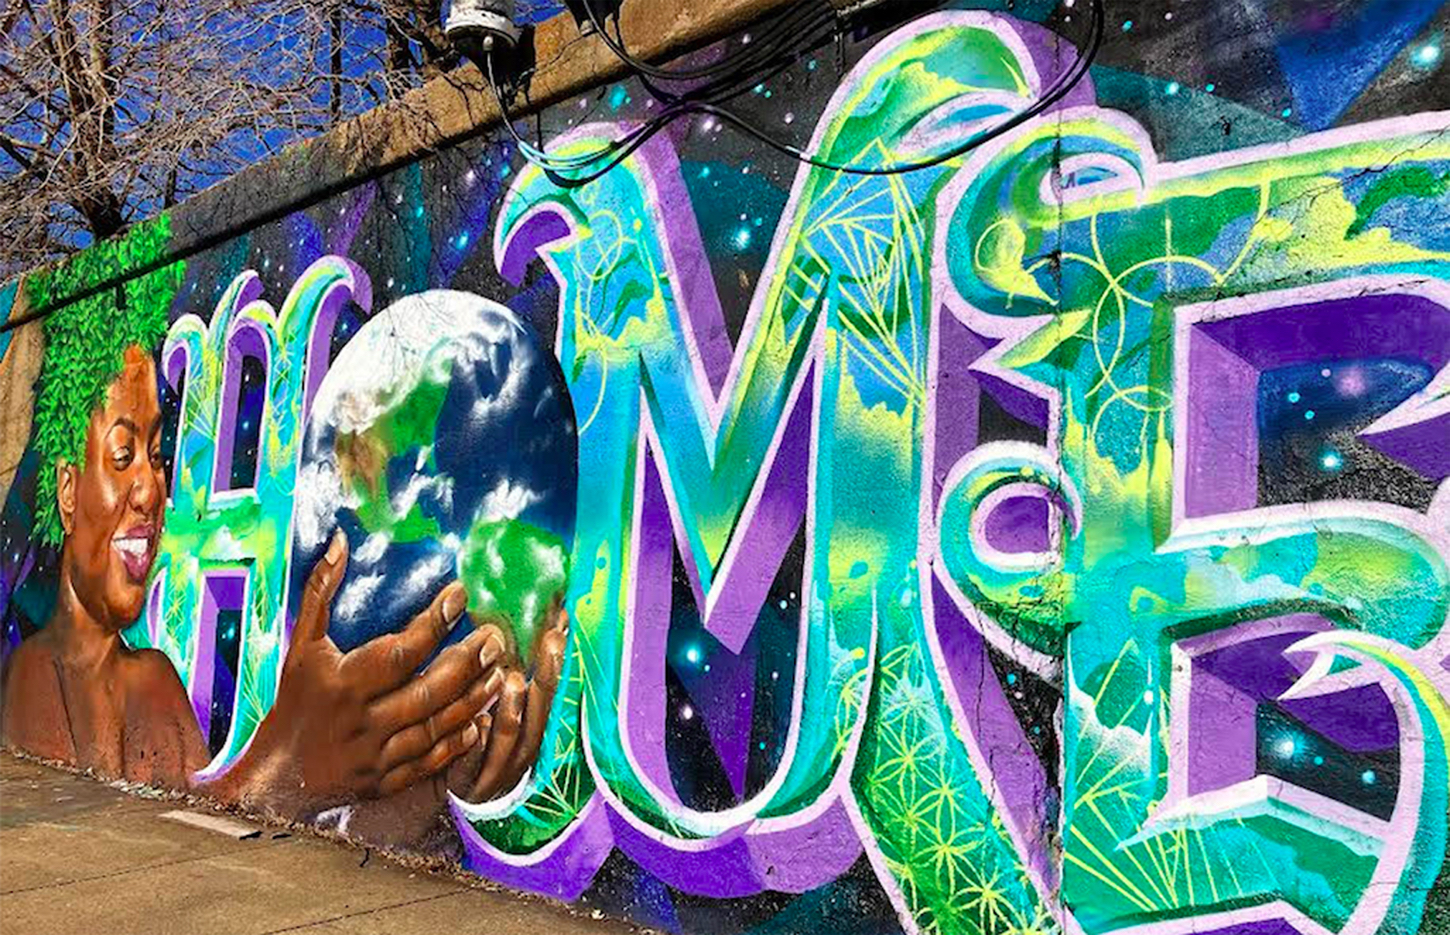 The mural titled “Home,” done by the Mural Mafia at 16th Street and Ashland Avenue. 